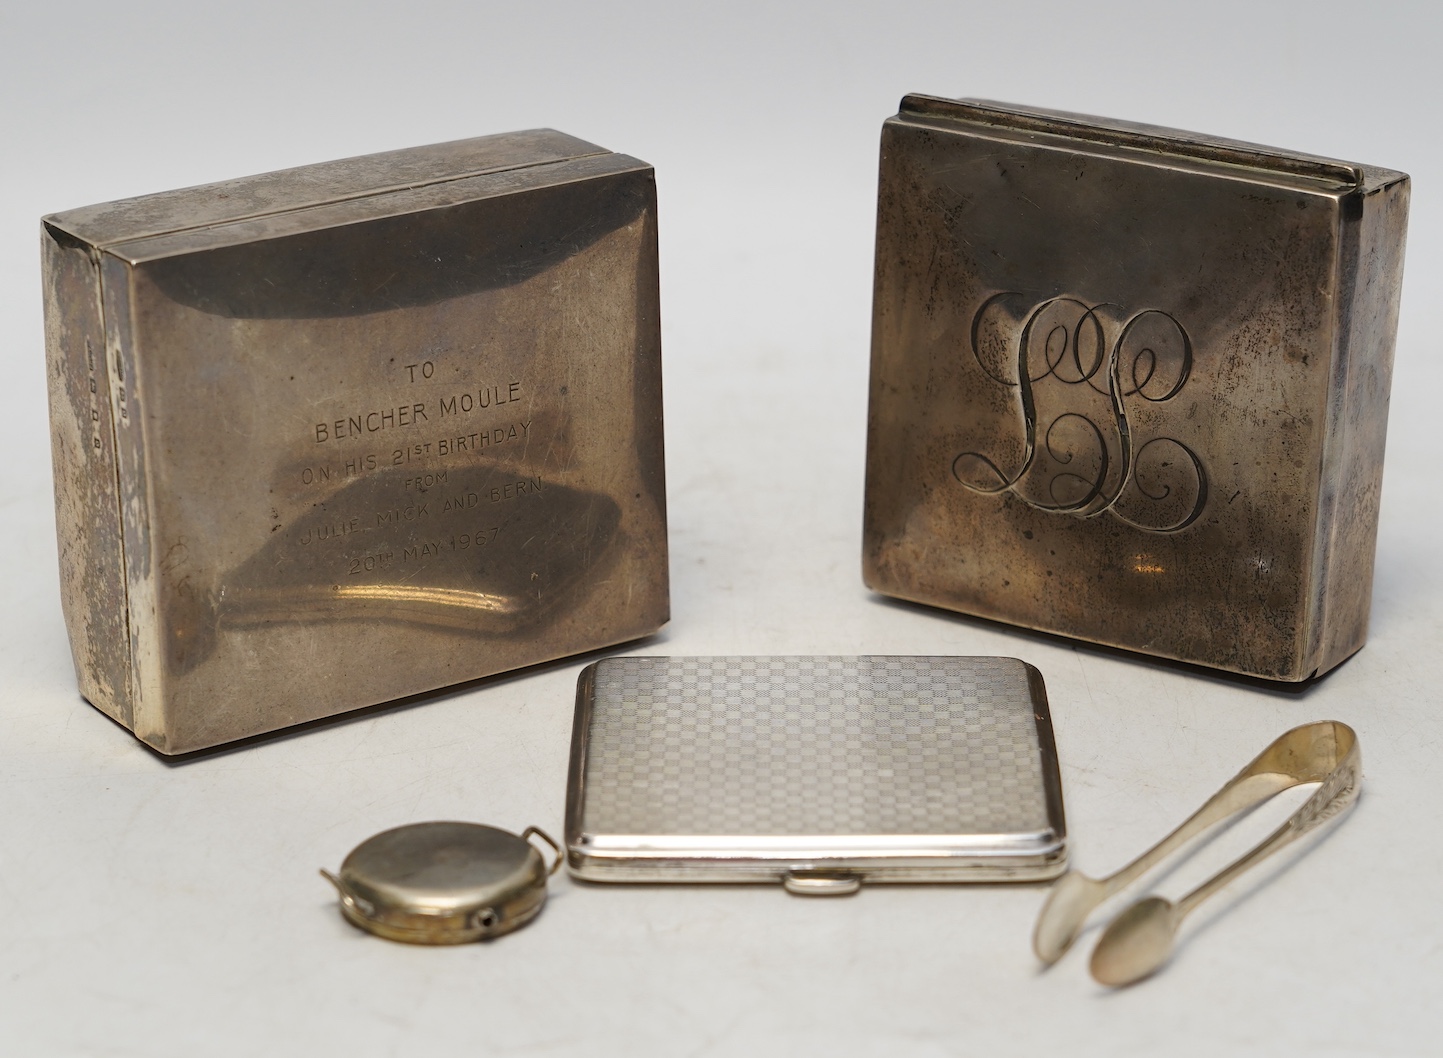 Two early 20th century silver mounted square cigarette boxes, largest 10.1cm, a similar silver cigarette case and three other silver items. Condition - fair to poor